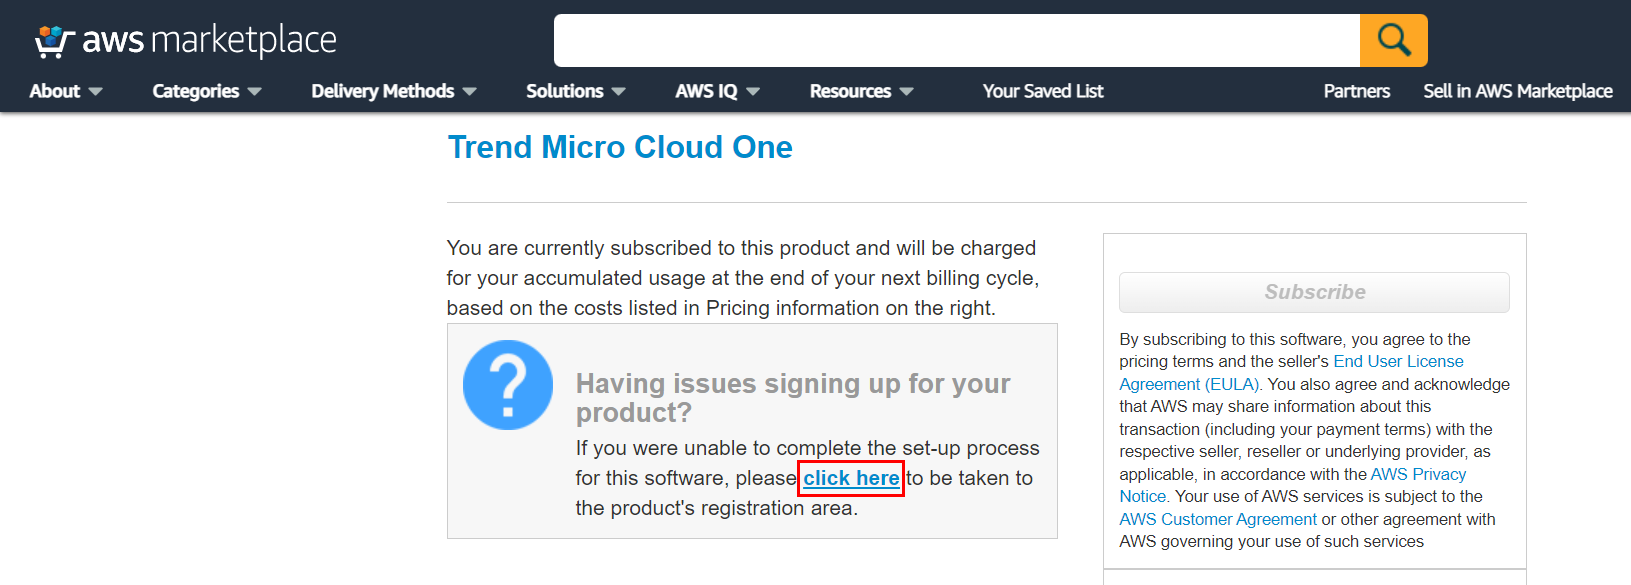 Image showing having issues signing up for your product?